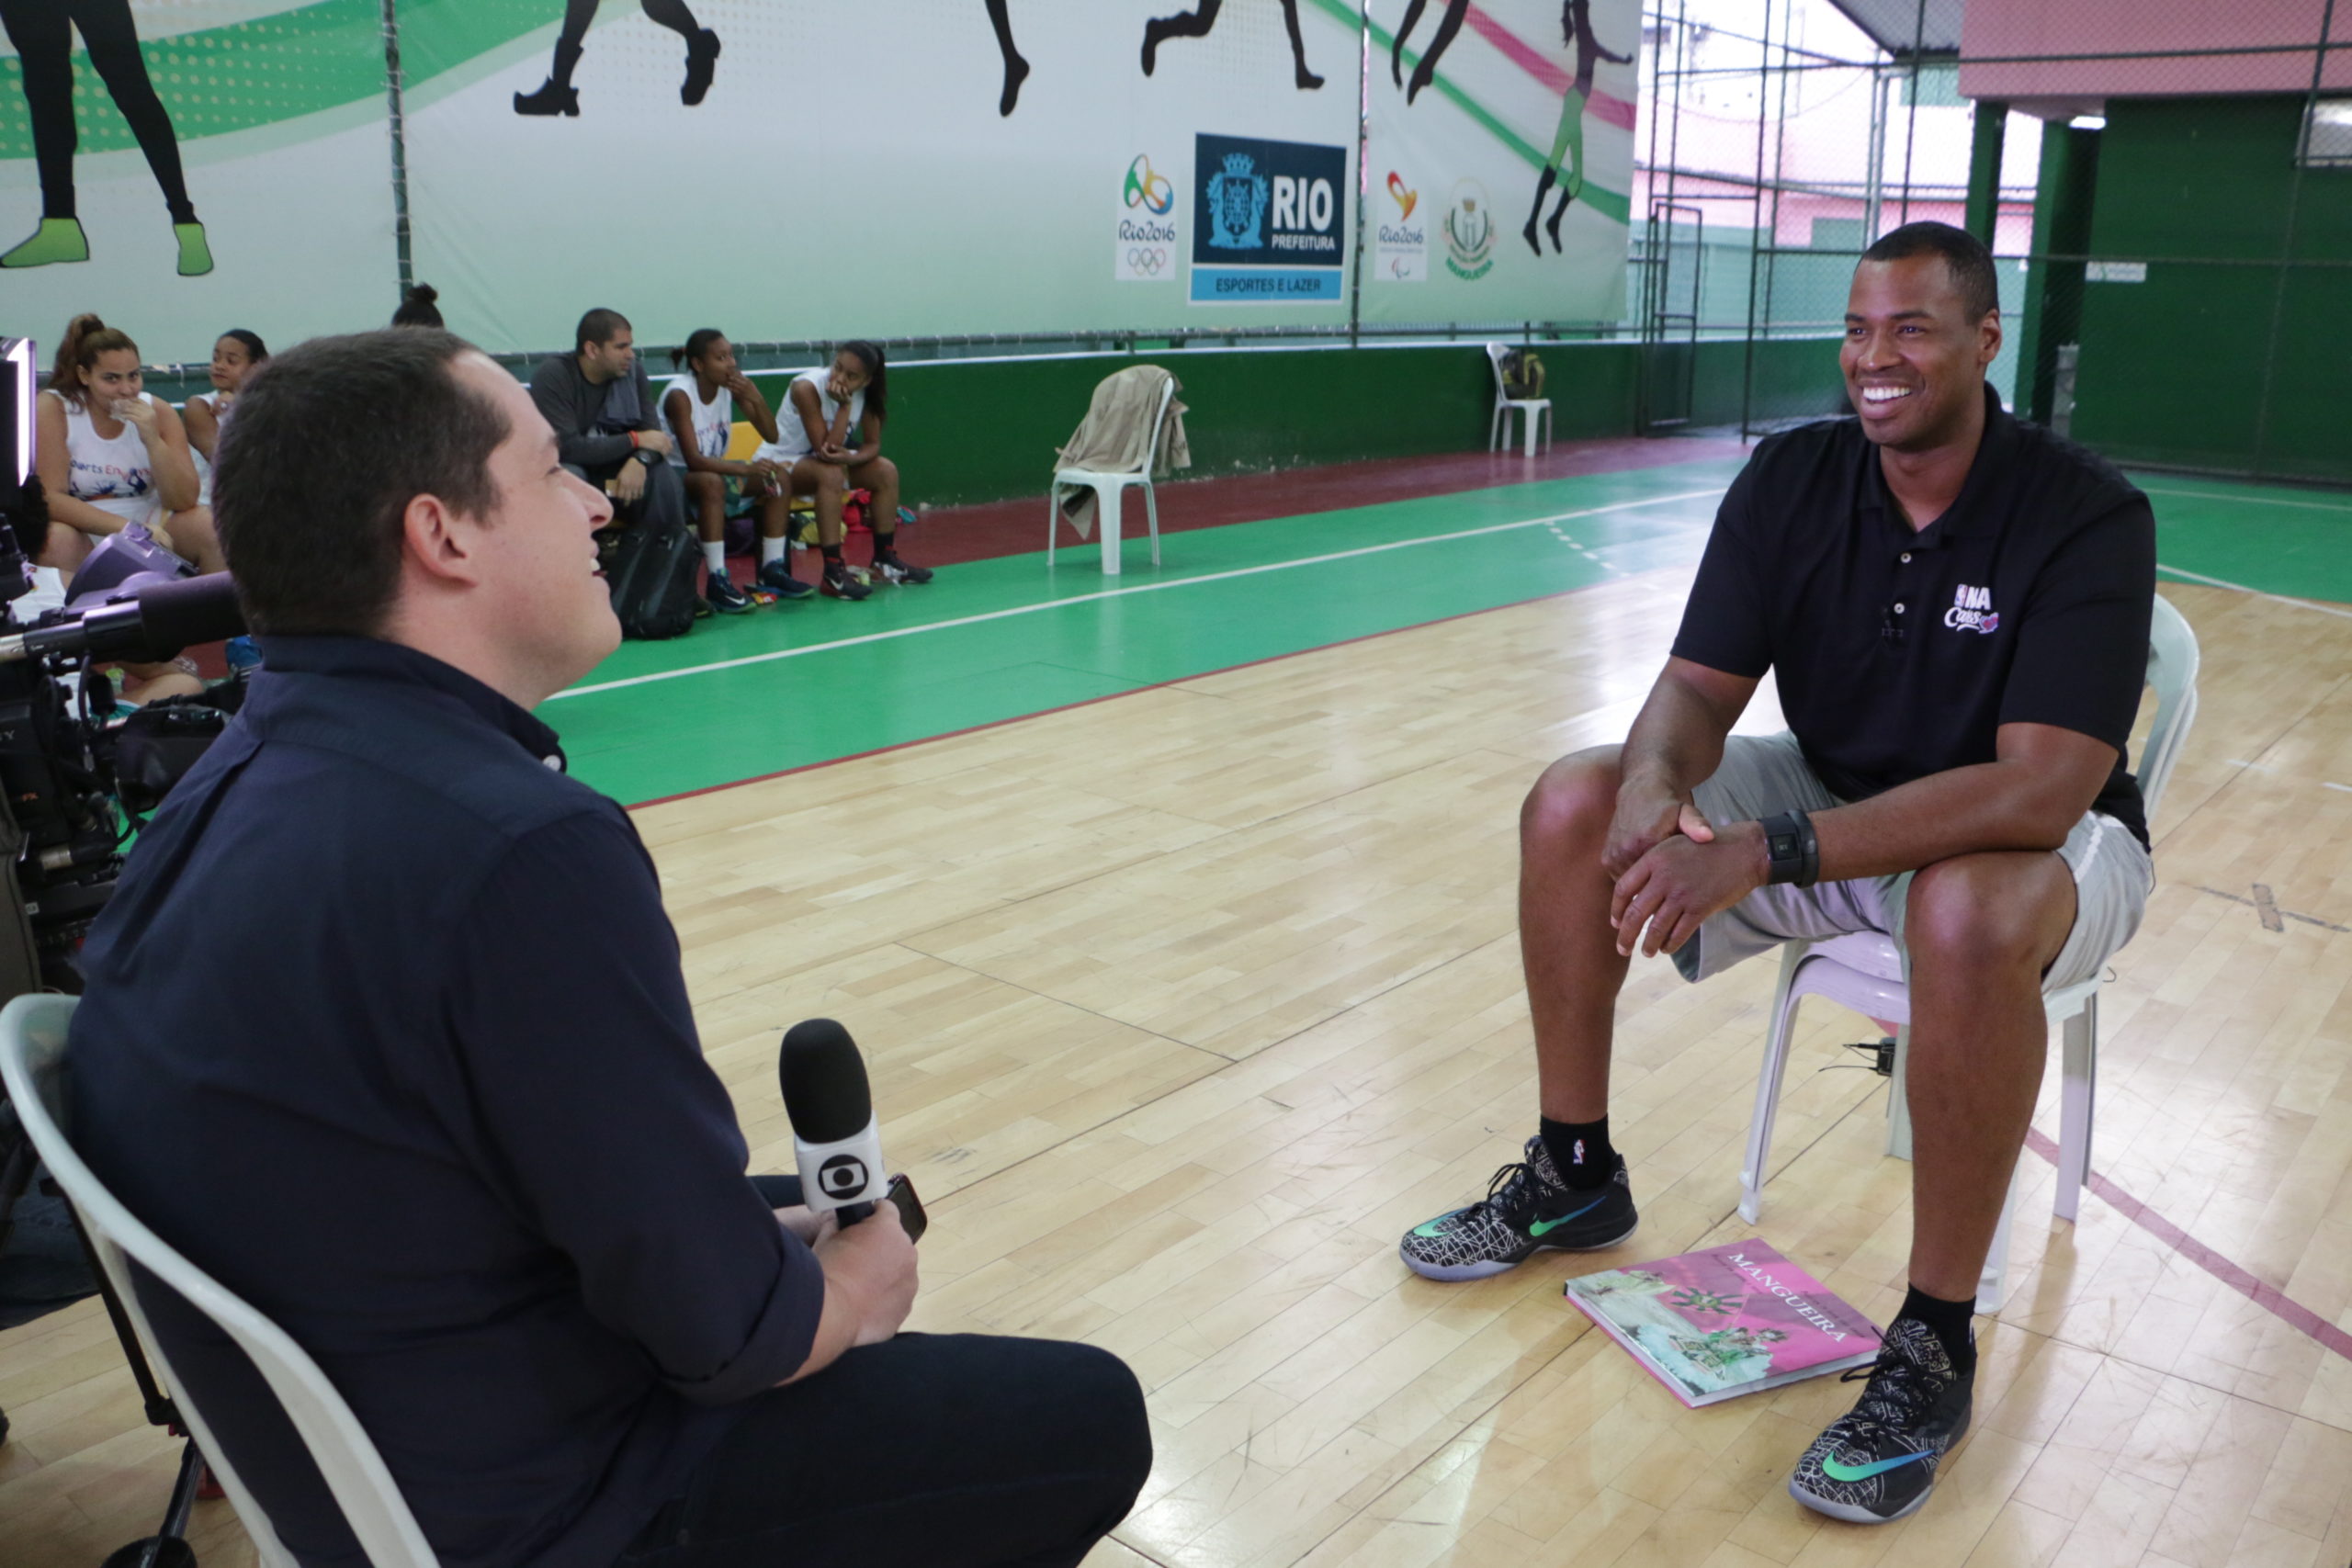 Local media interview with Jason Collins